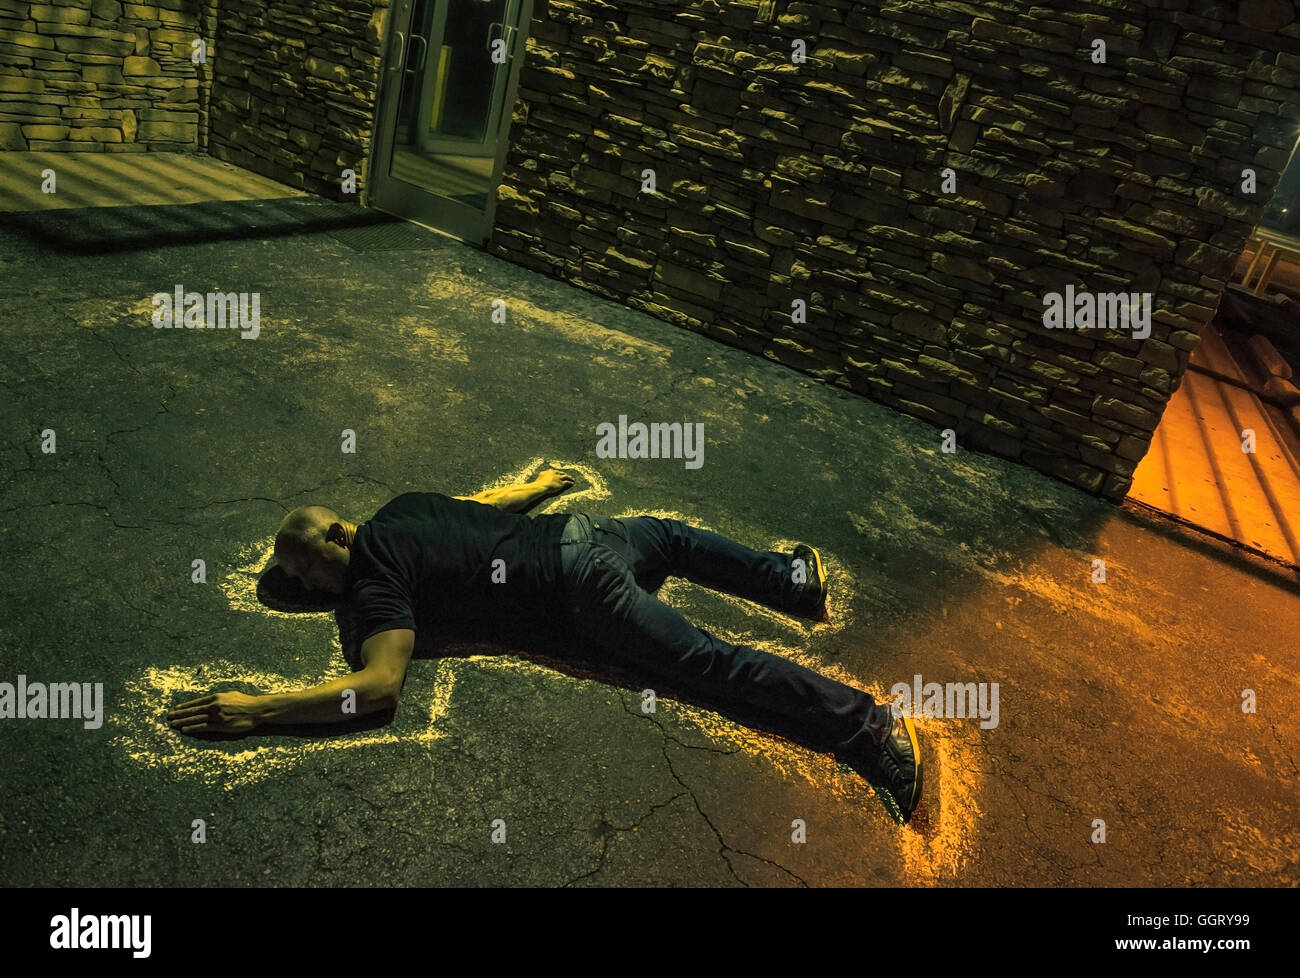 Chalk outline of body of Caucasian victim on pavement Stock Photo